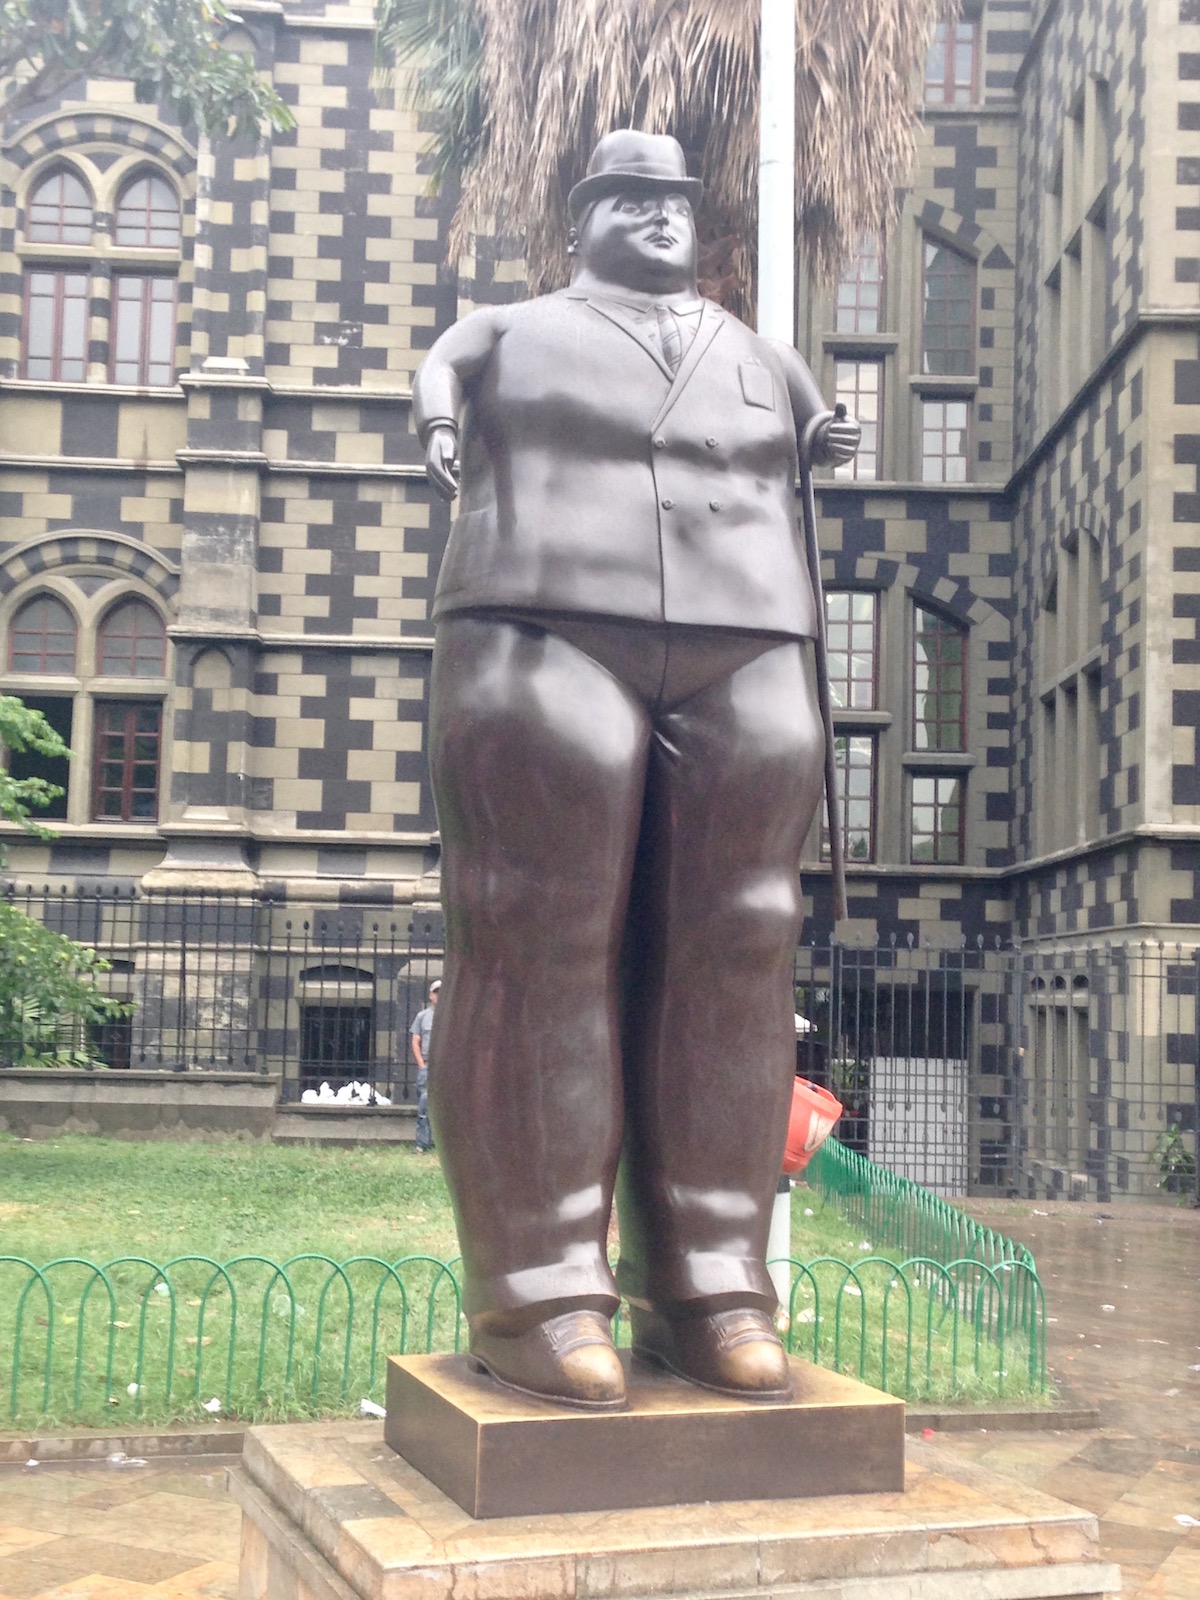 A statue of a chubby man in a bowler hat